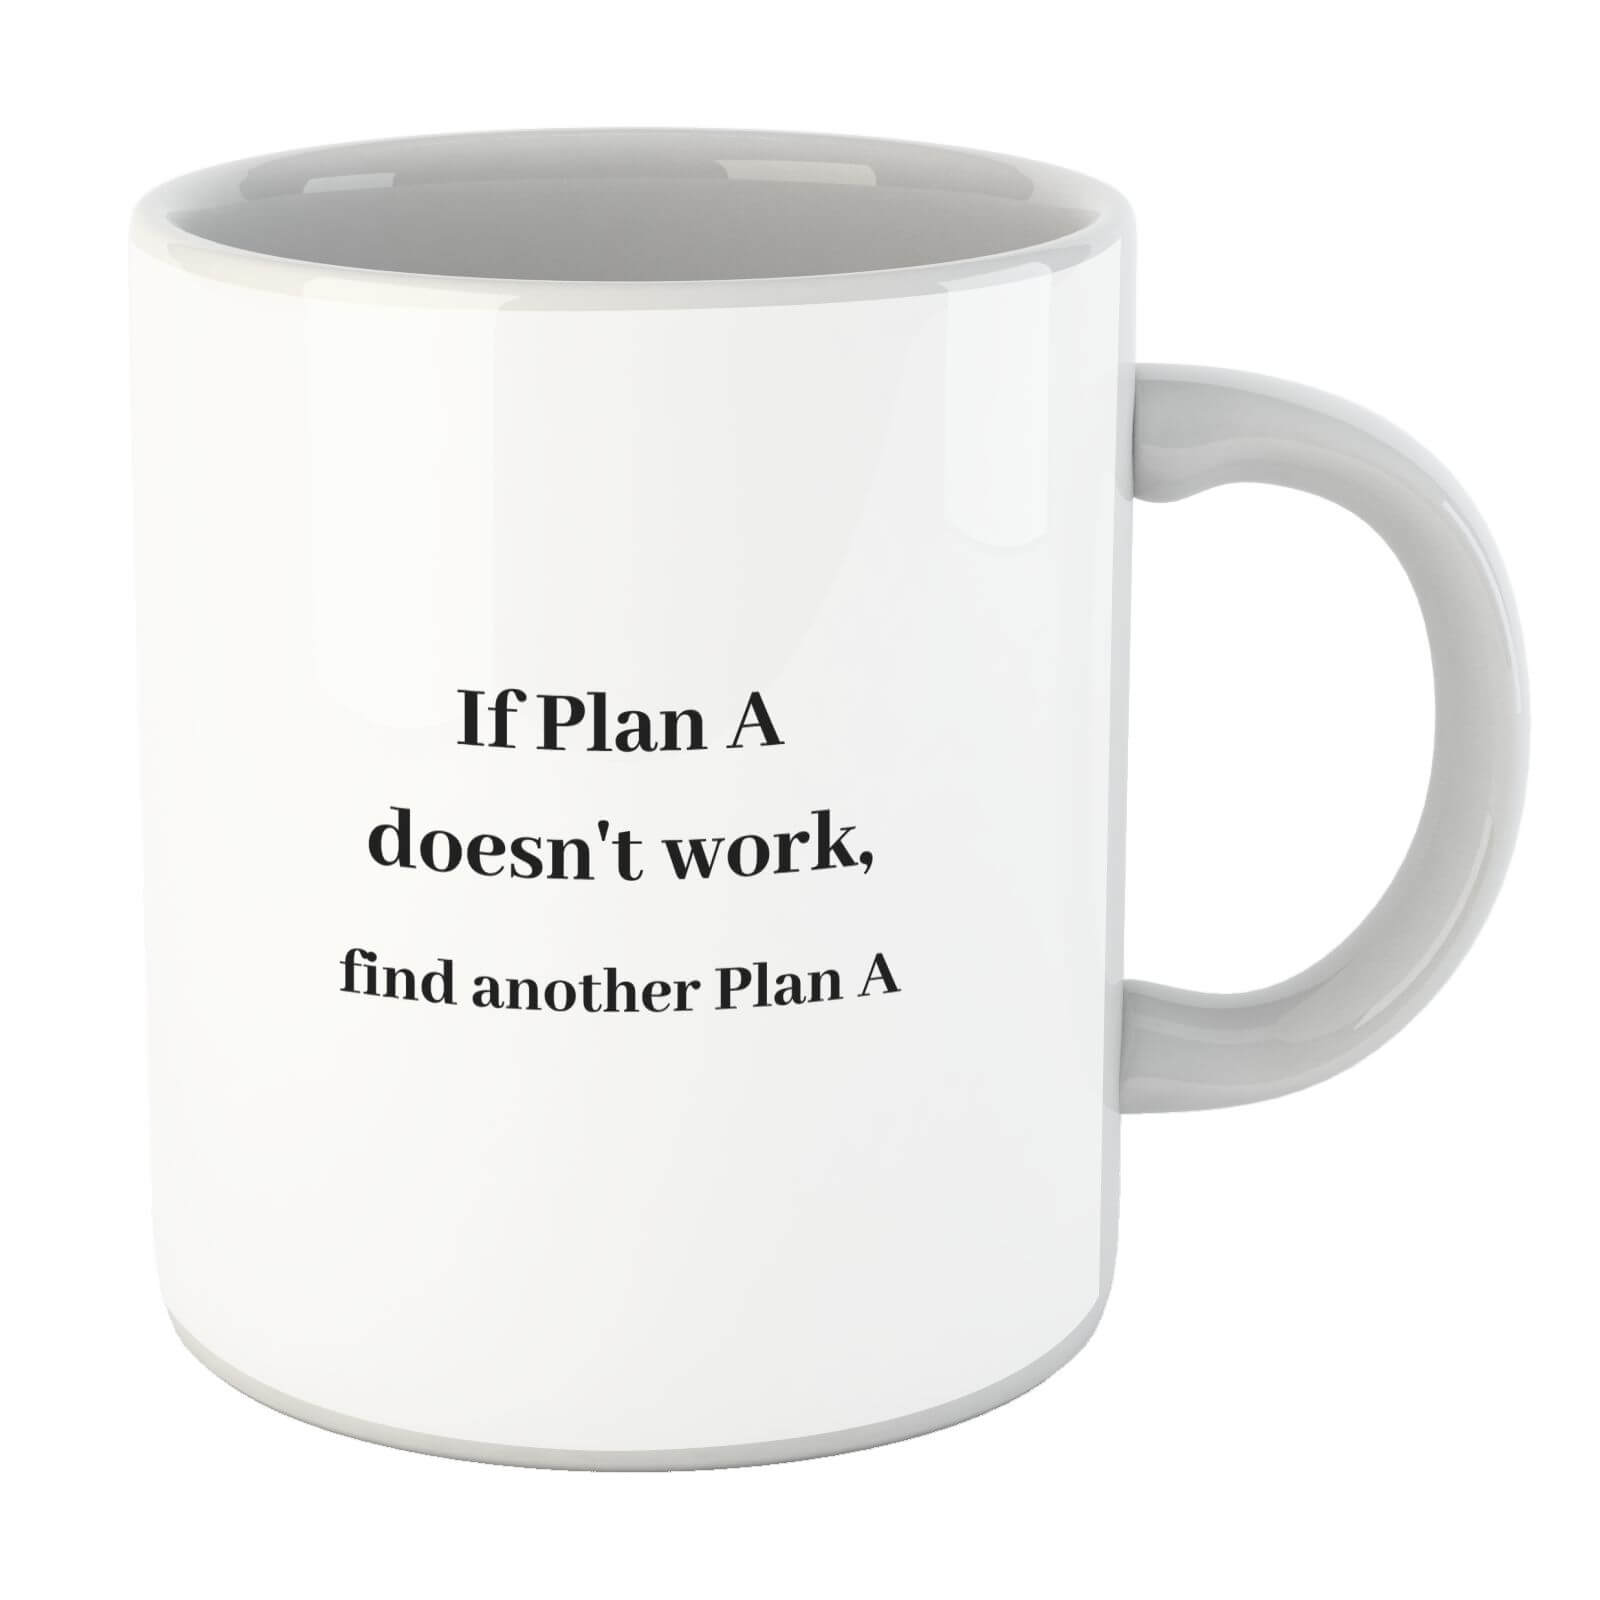 Lanre Retro If Plan A Doesn't Work, Find Another Plan A Mug